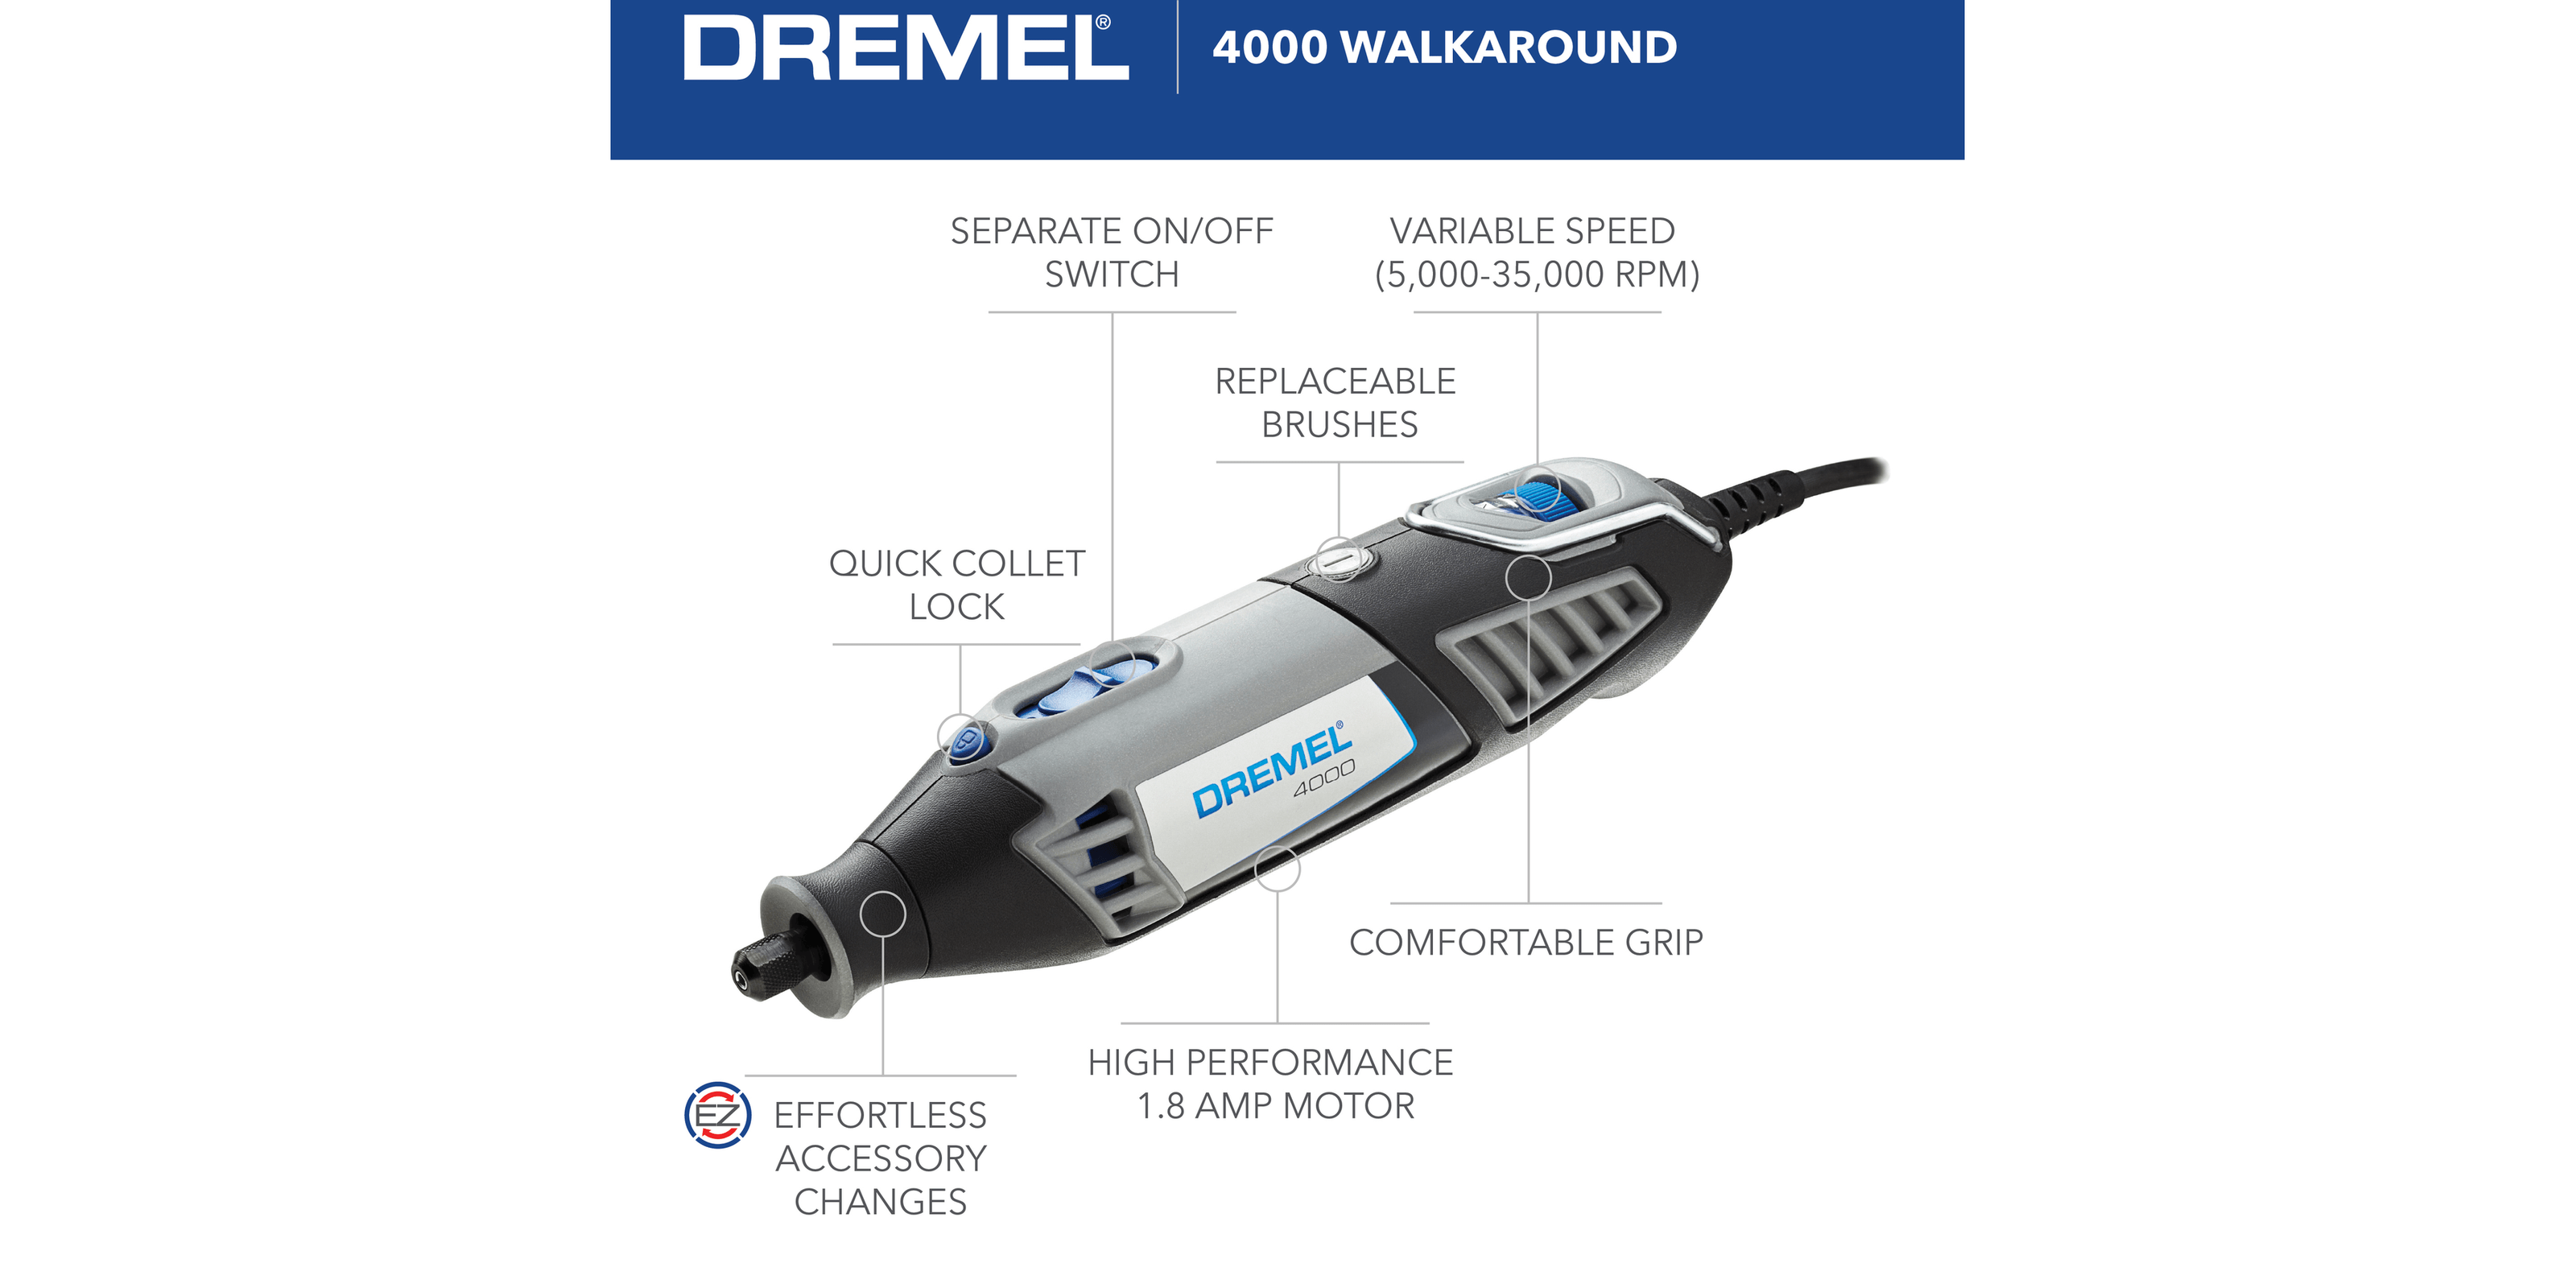 Dremel 4000-4/34 Rotary Tool Kit with 4 attach. and 34 access.